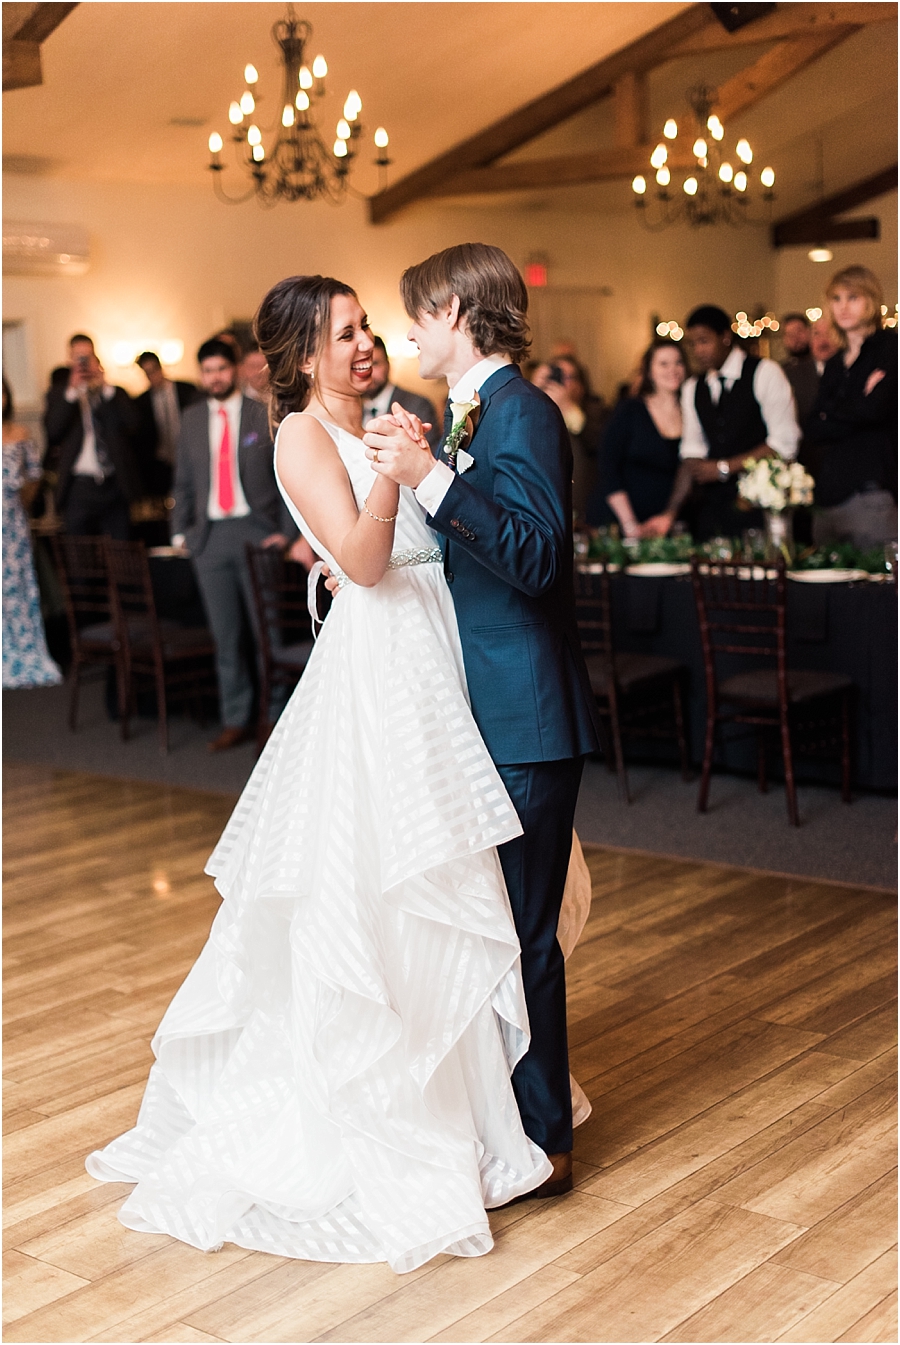 Cozy, Winter Wedding at the Holly Hedge Estate in Philadelphia by film photographer Hillary Muelleck